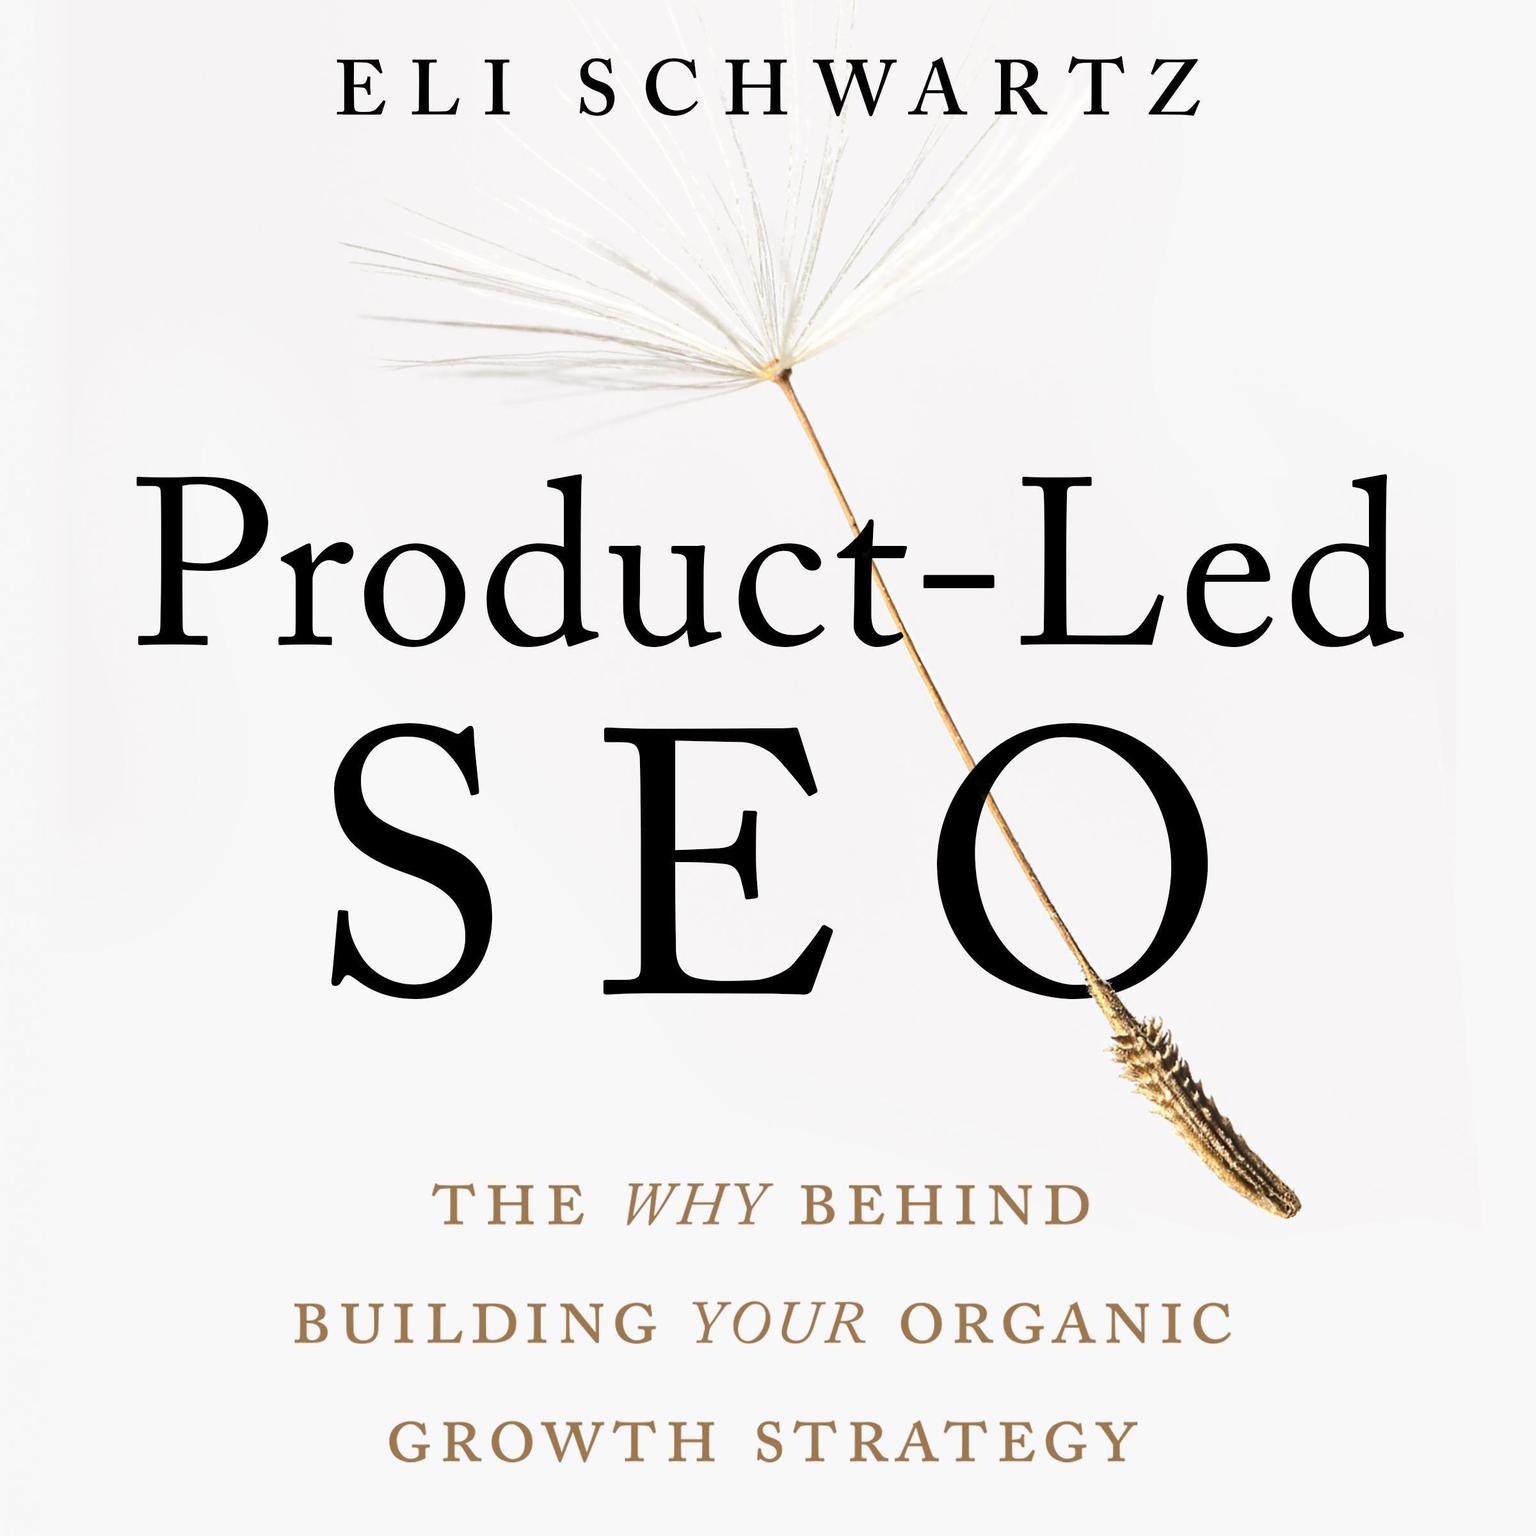 Product-Led SEO: The Why Behind Building Your Organic Growth Strategy Audiobook, by Eli Schwartz